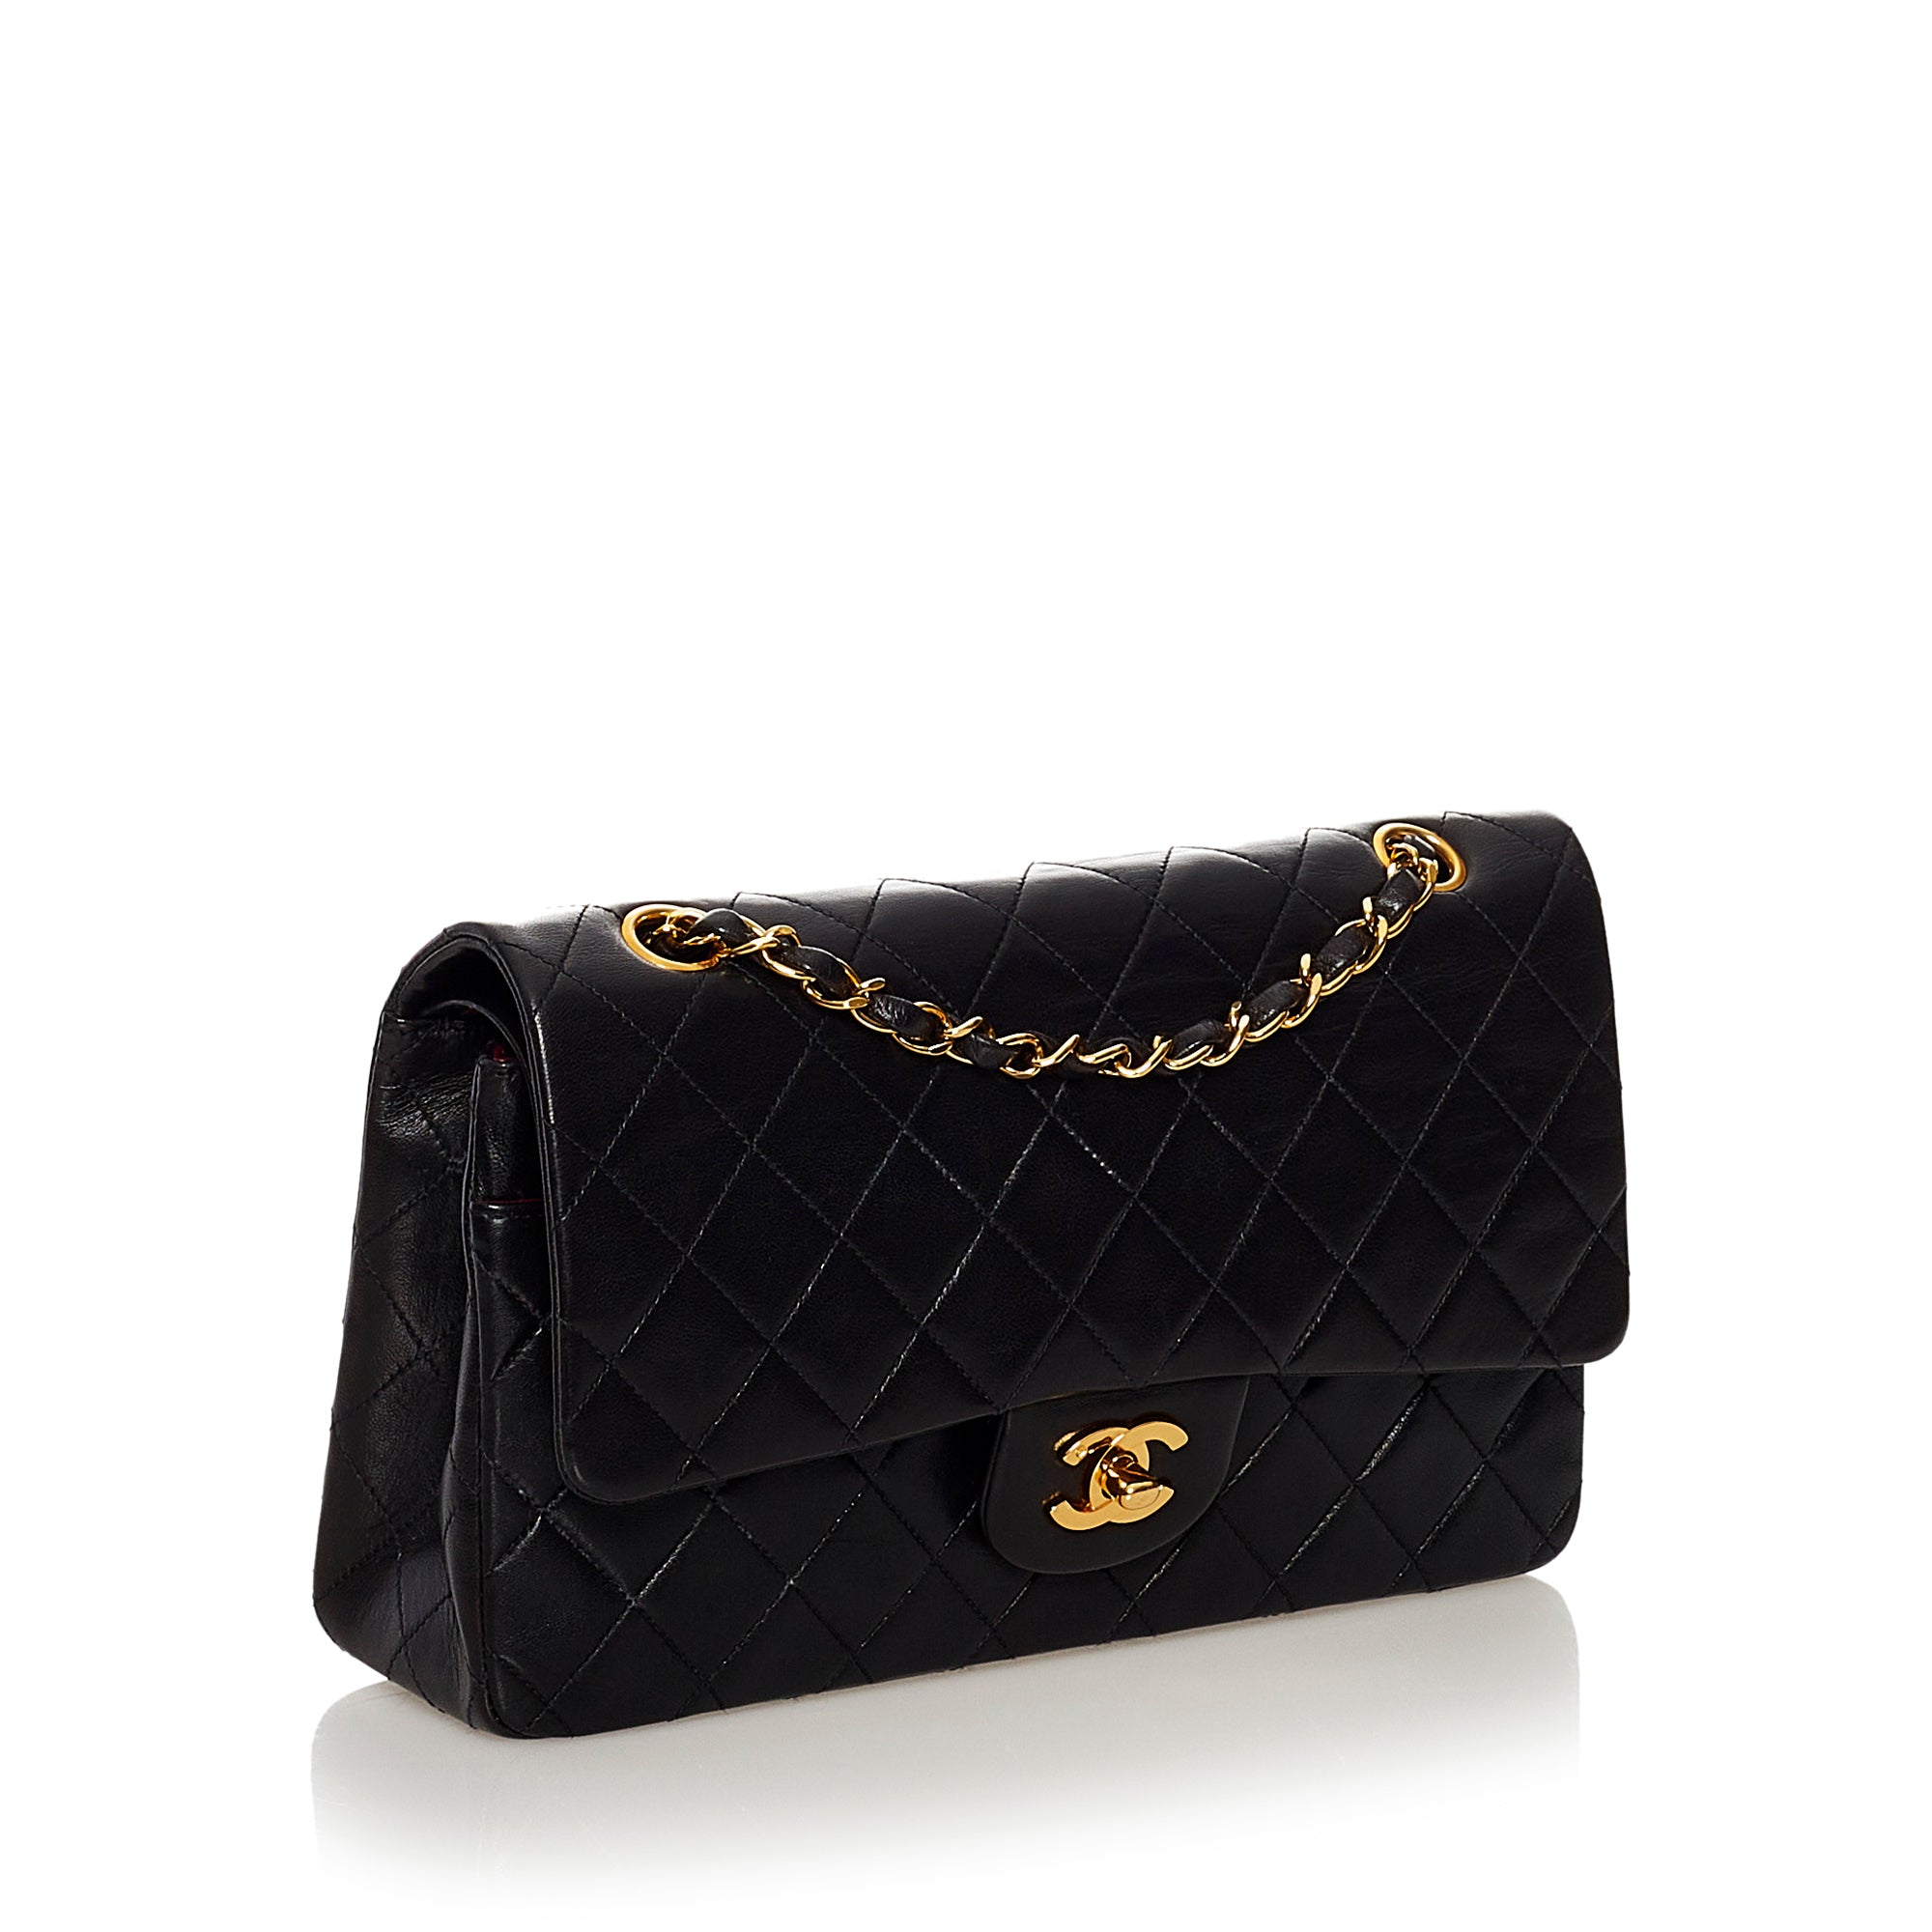 CHANEL CHANEL CC Matelasse Chain Shoulder Bag leather Black Used Women Coco